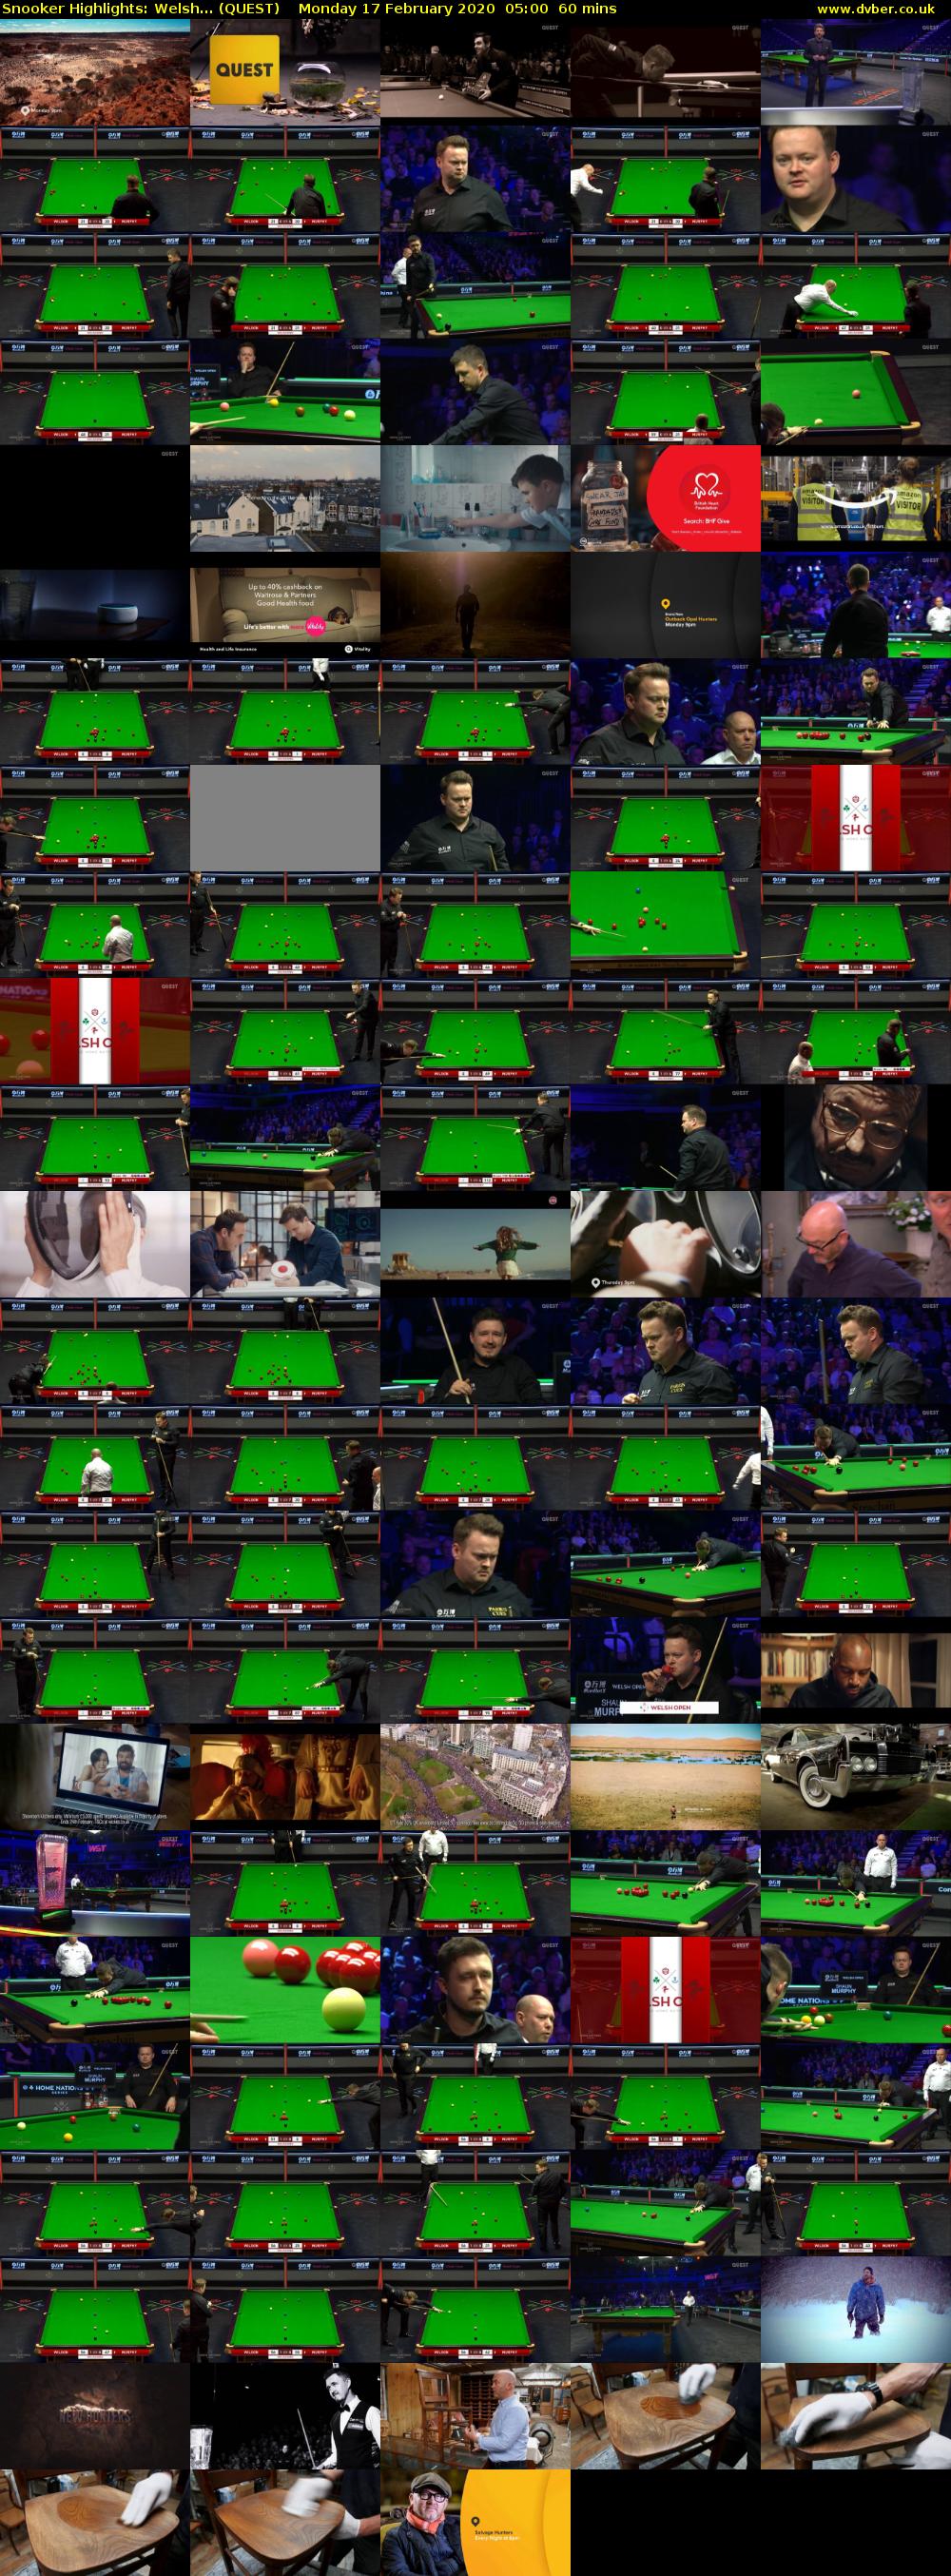 Snooker Highlights: Welsh... (QUEST) Monday 17 February 2020 05:00 - 06:00